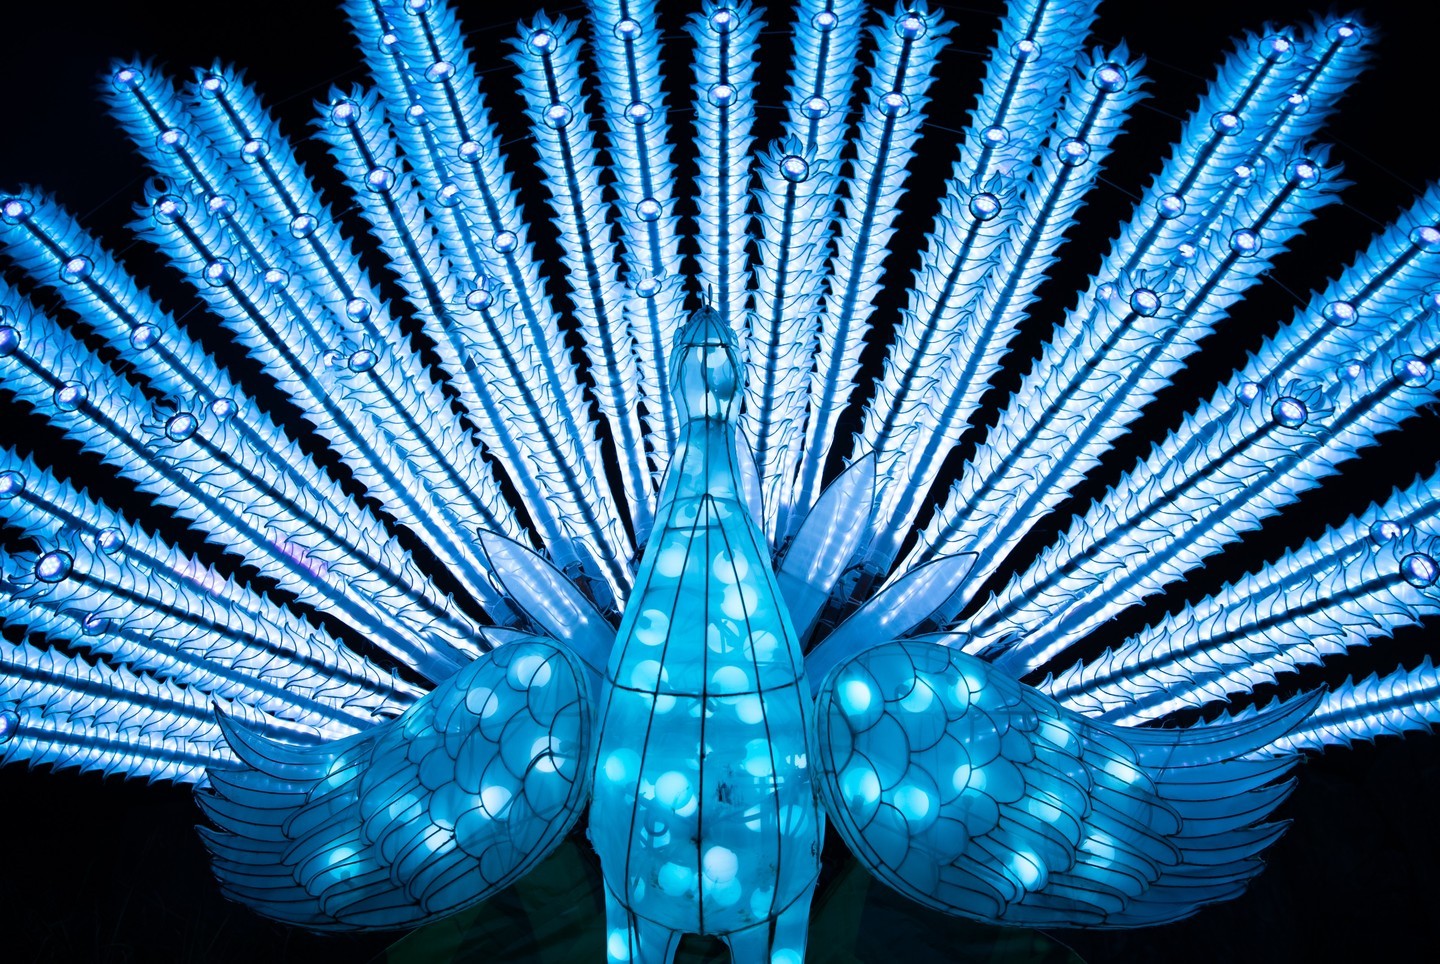 Peacock with tail spread made of blue lights.